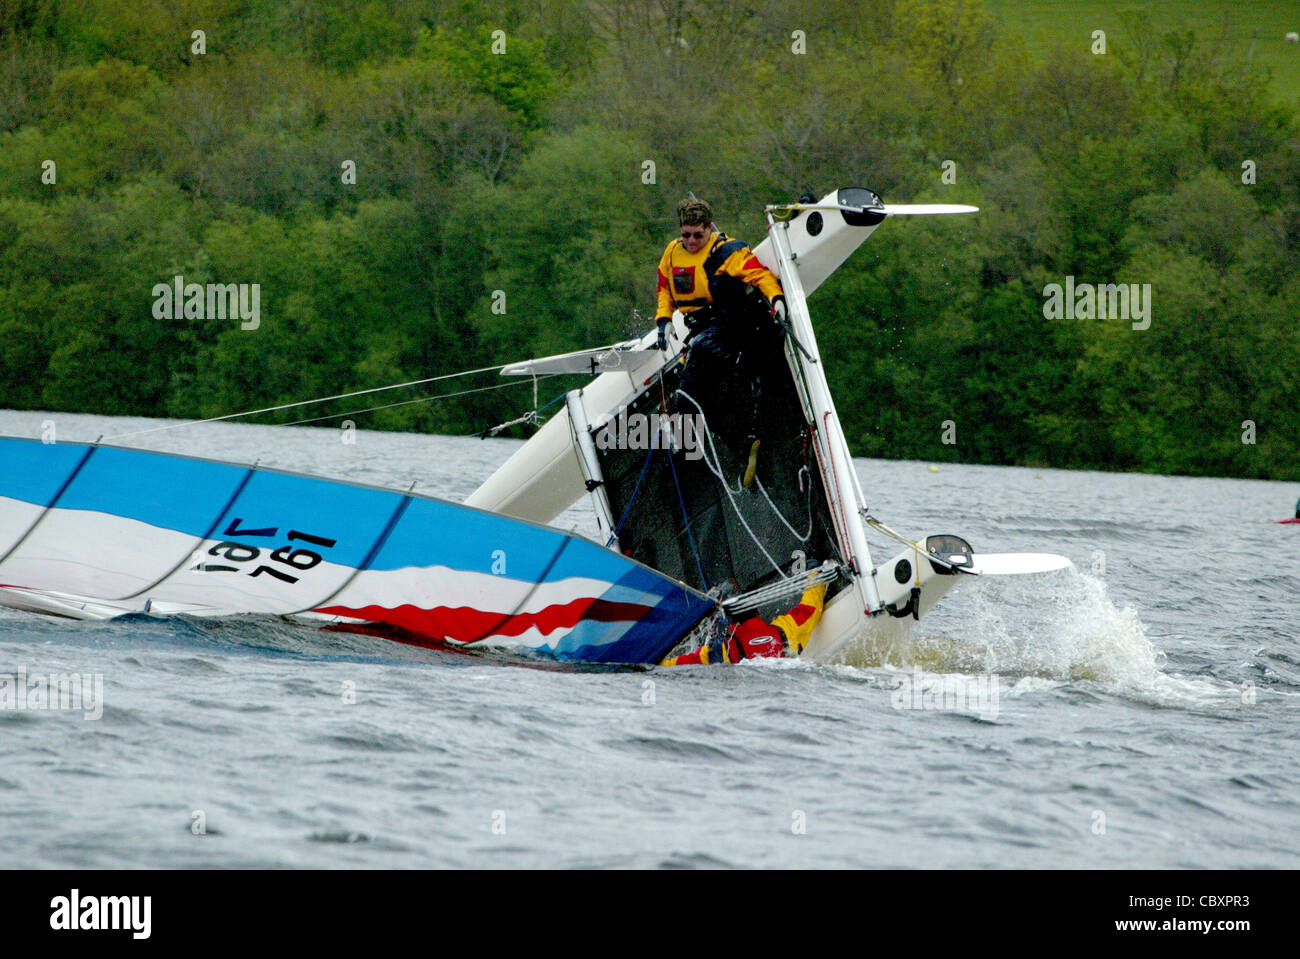 A high speed catamaran pitch poles and crashes in high wind on Bala Lake in North Wales Stock Photo